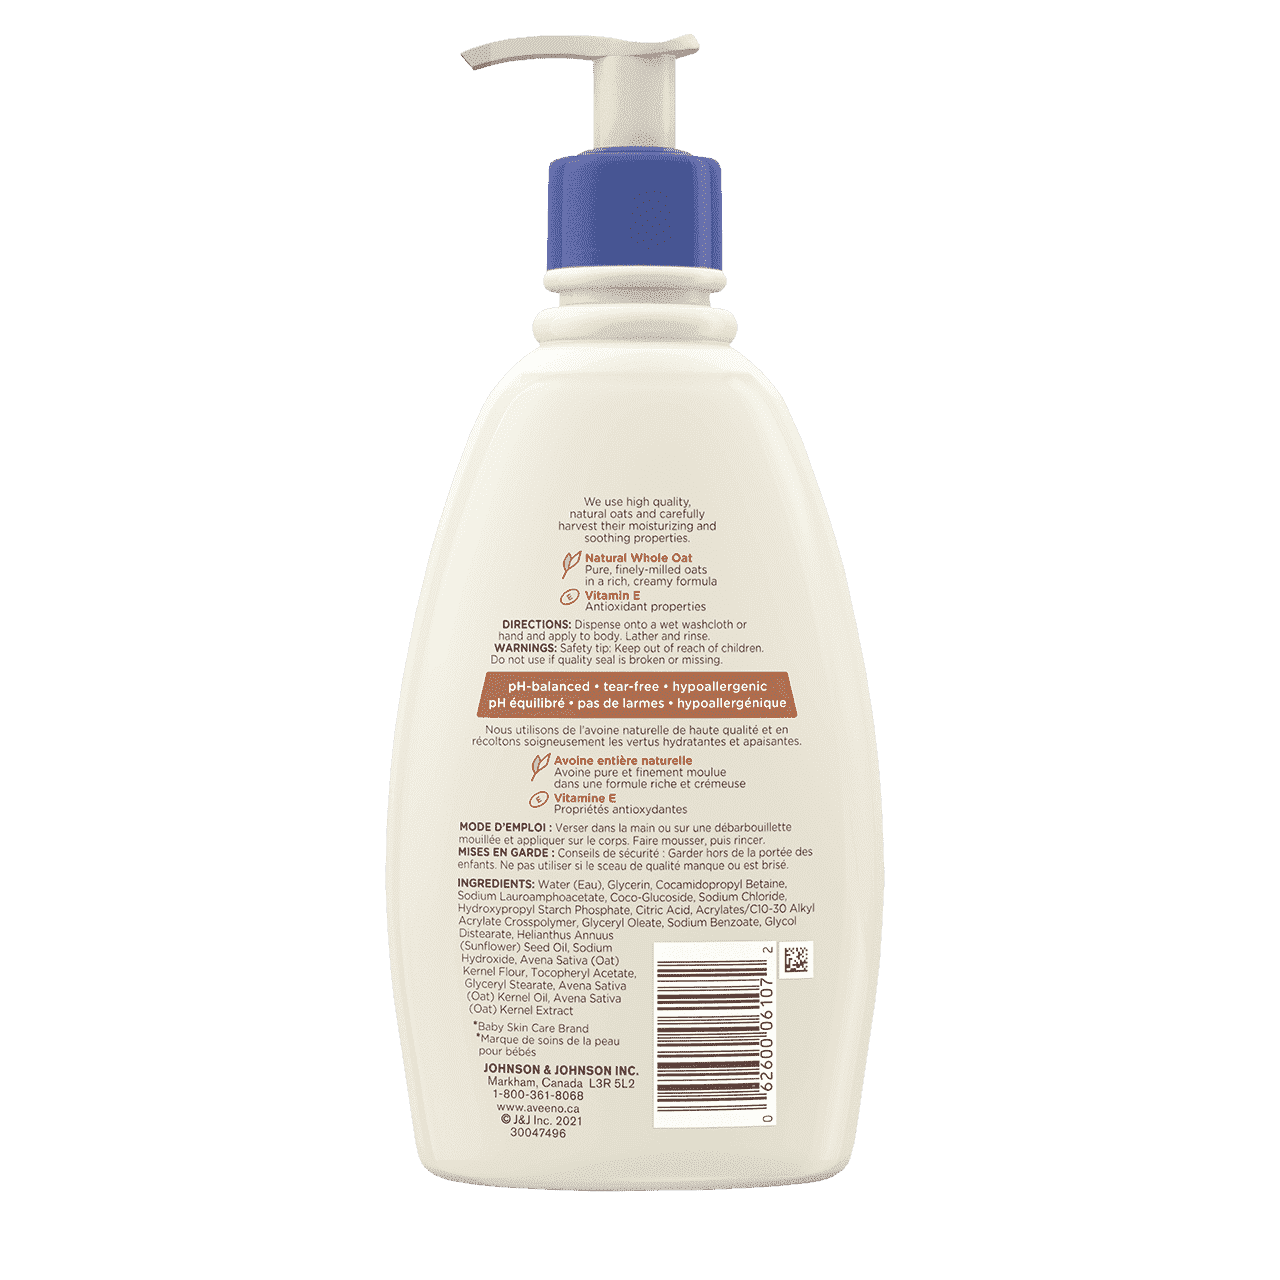 354ml bottle of Aveeno Baby Soothing Hydration, back label